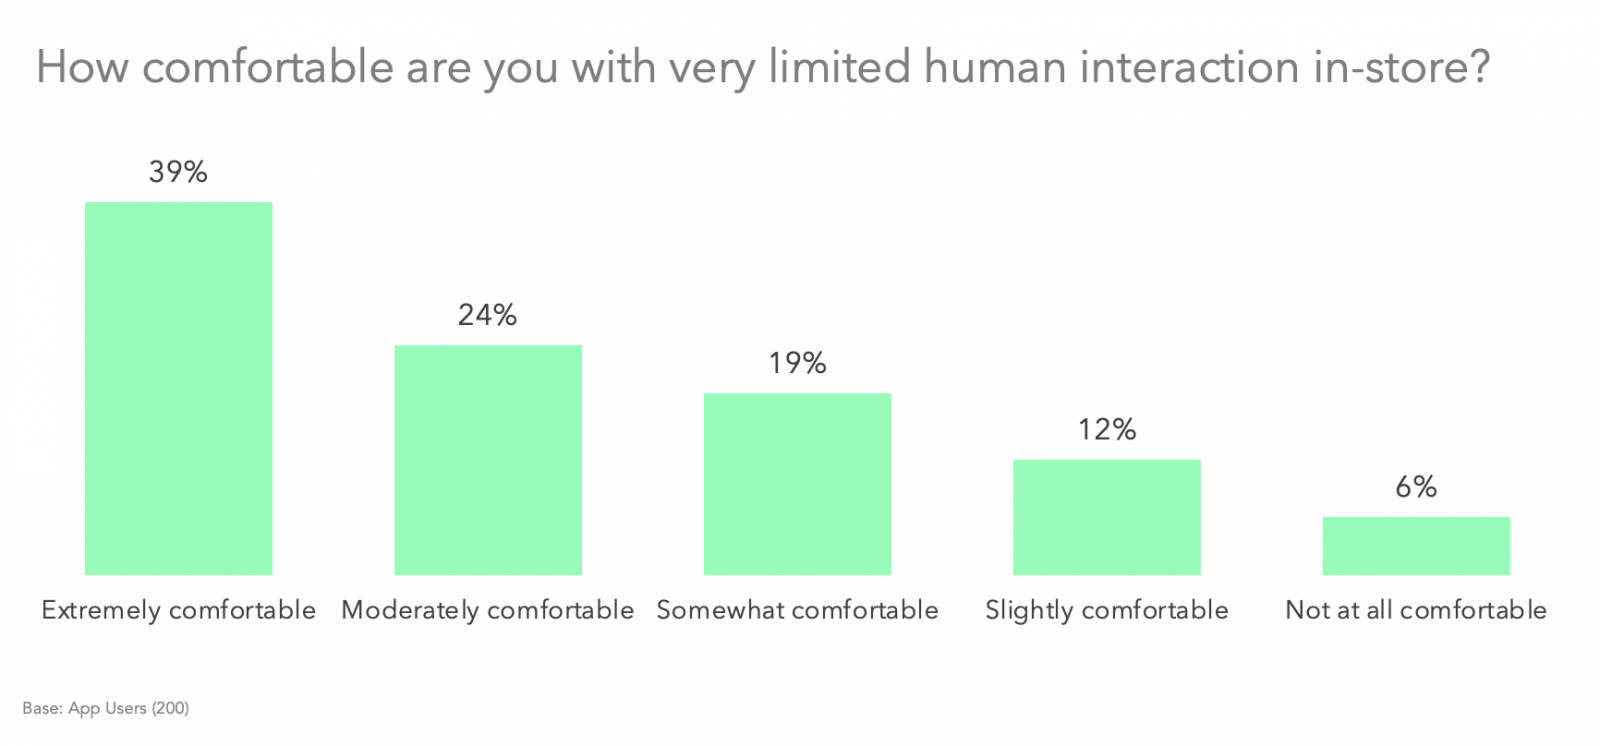 How comfortable are you with very limited human interaction in-store?